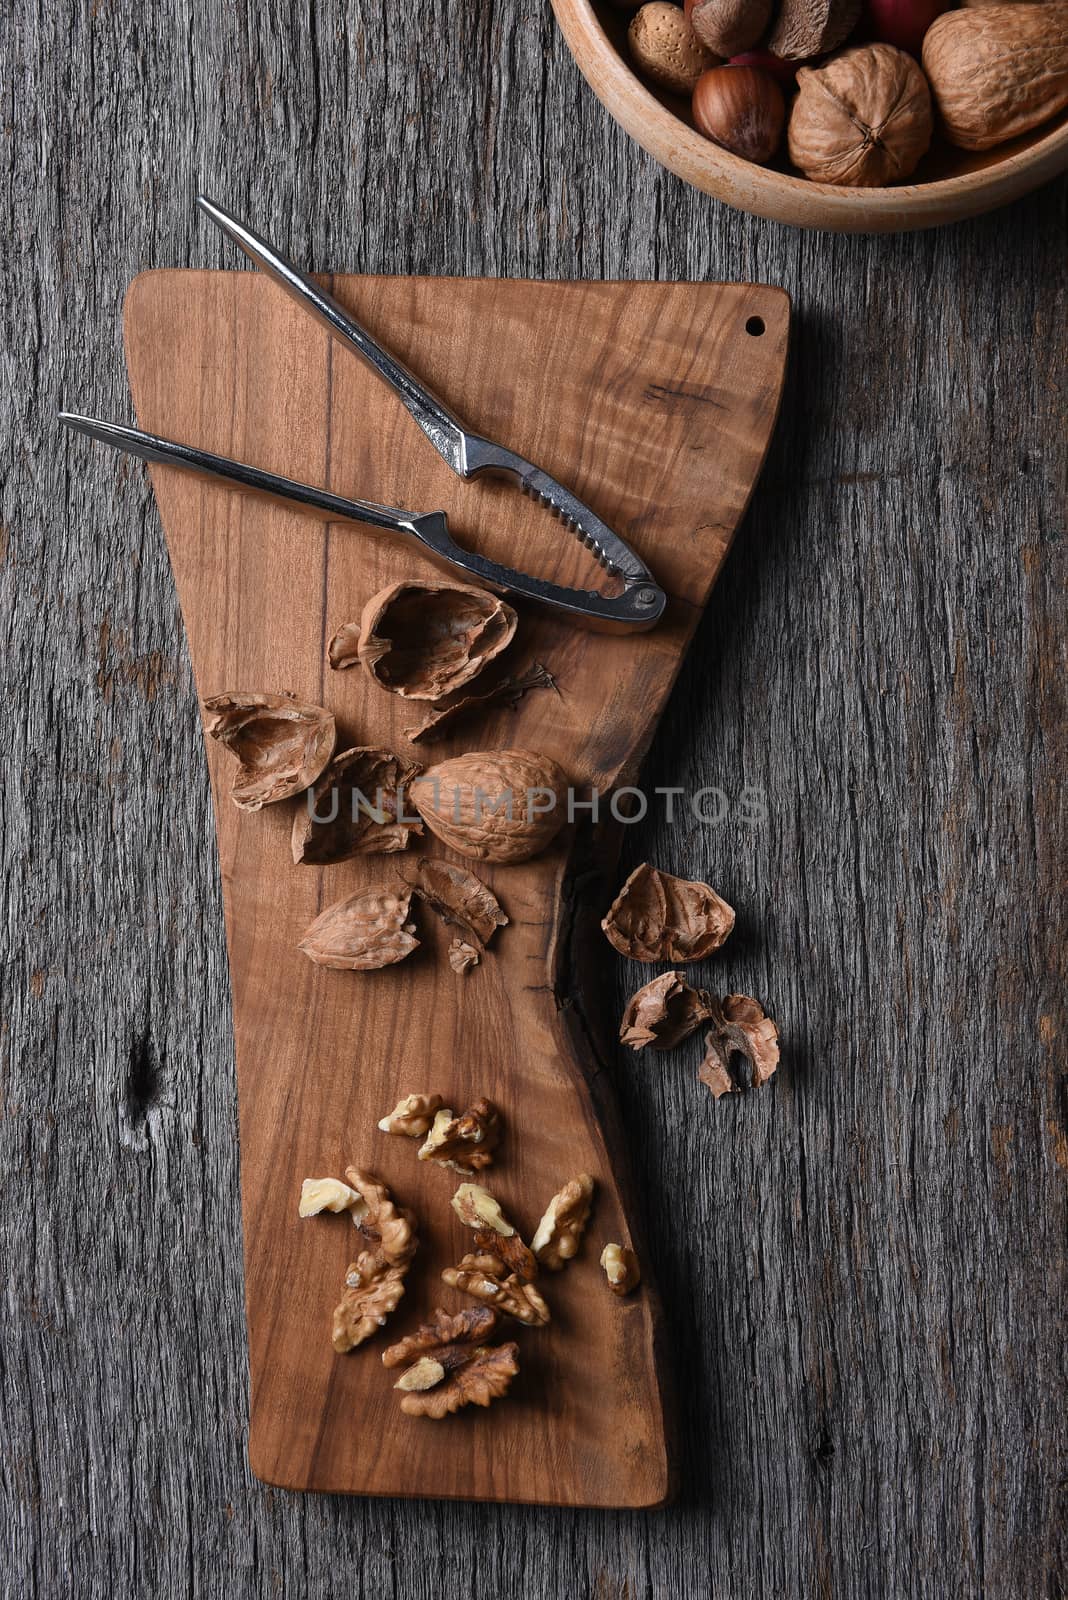 Cutting board with cracked walnuts and nutcracker with a bowl of mixed nuts int he corner.